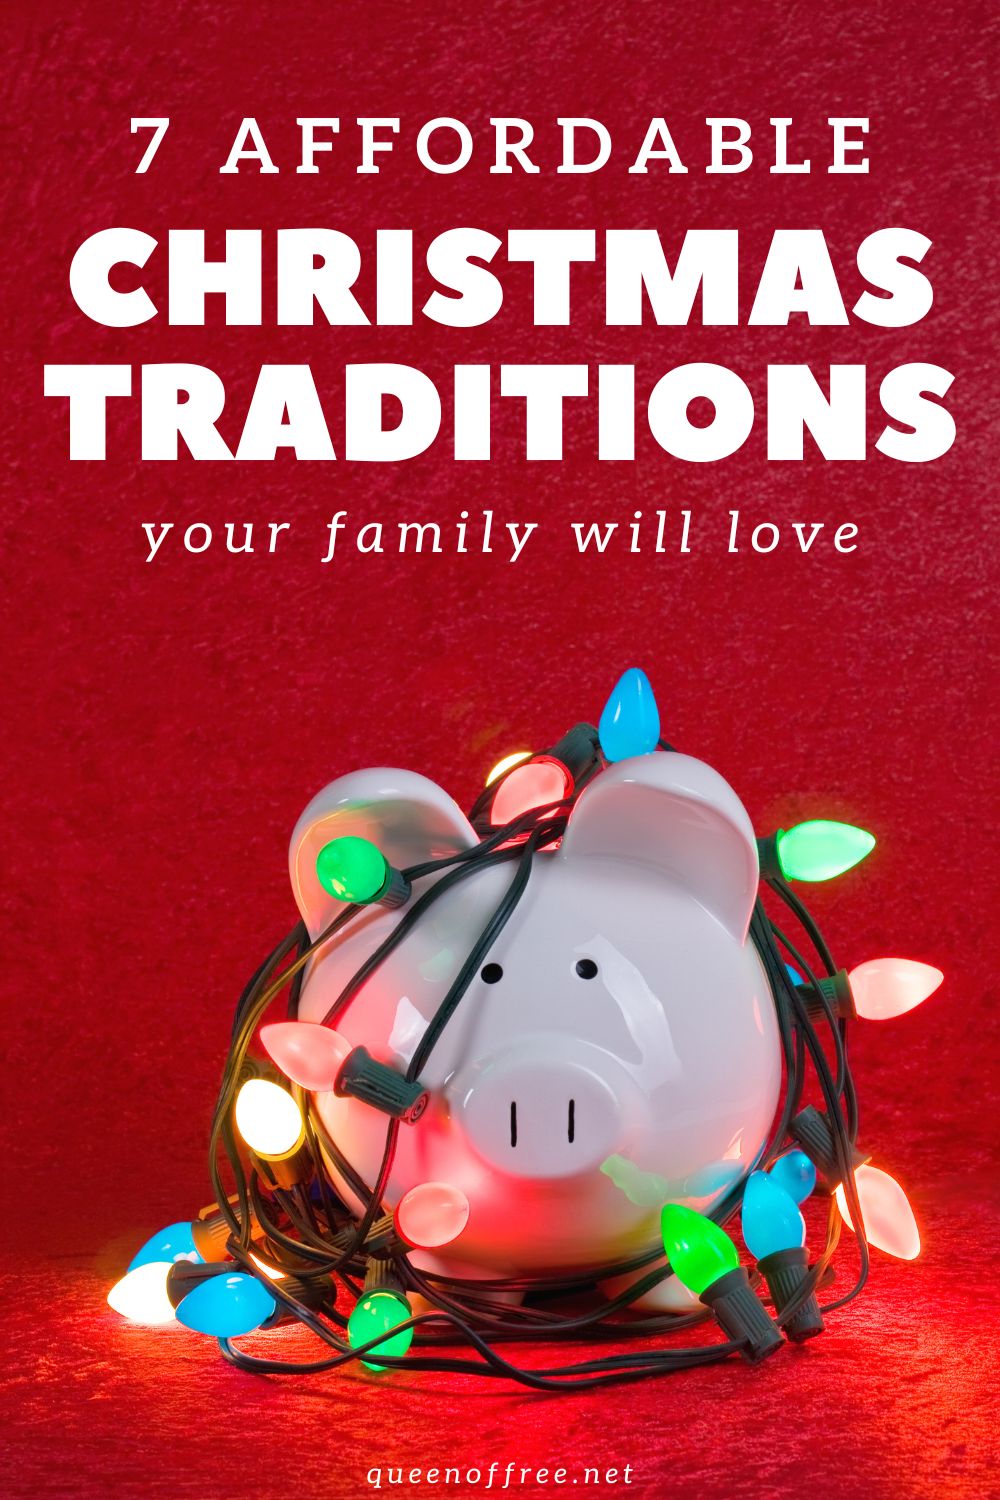 Feeling like the holiday season is pricey? Check out these 7 Affordable Christmas Traditions your family is certain to love.